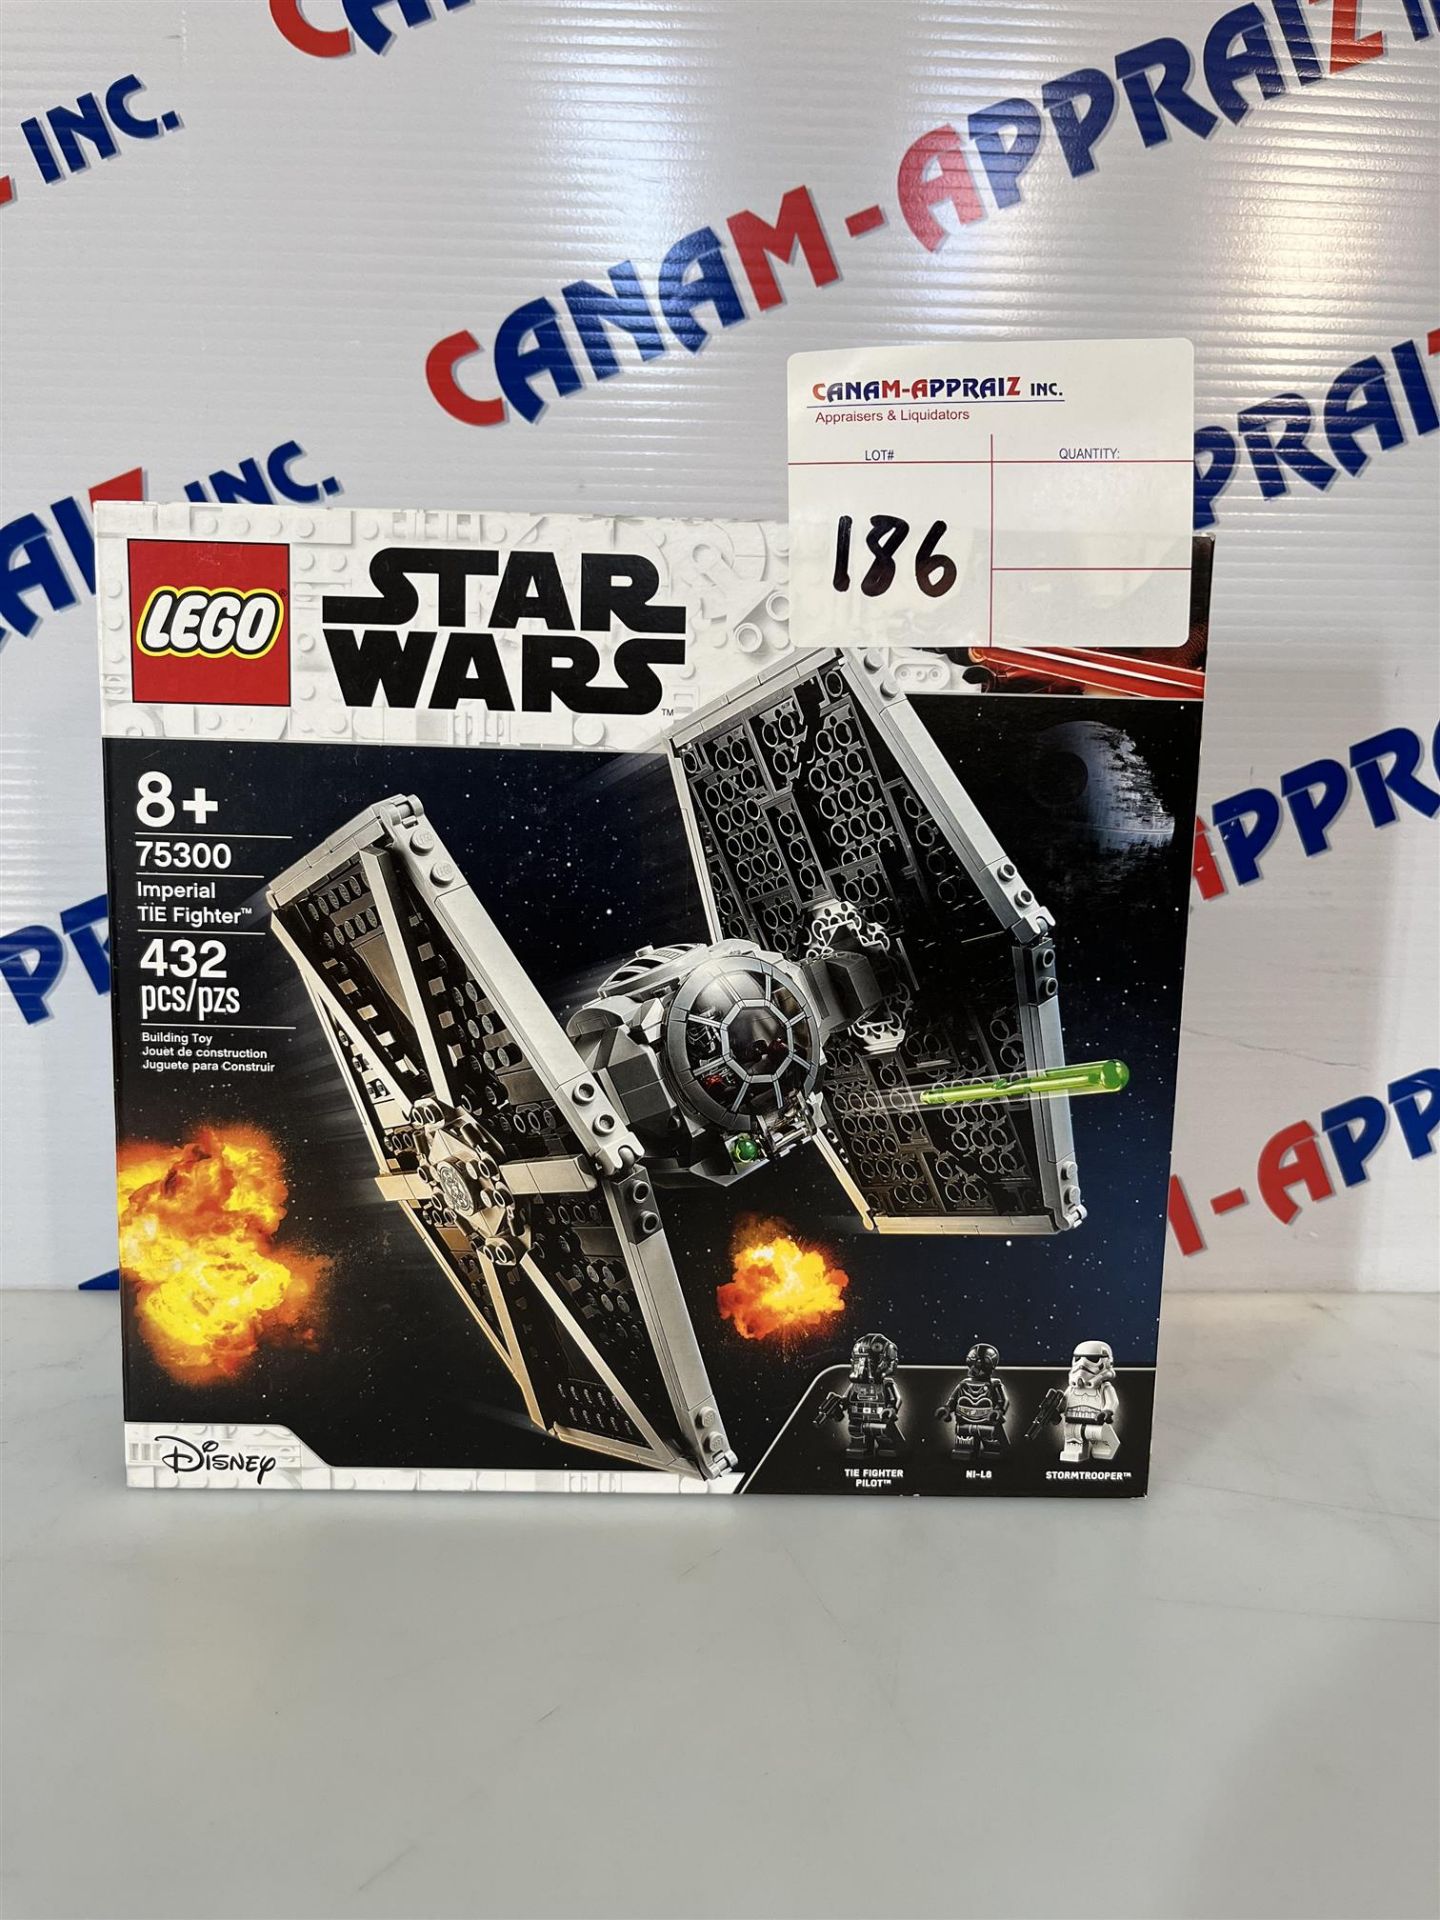 Lego Star Wars Imperial TIE Fighter 75300 - Ages 8+ - 432 PCS